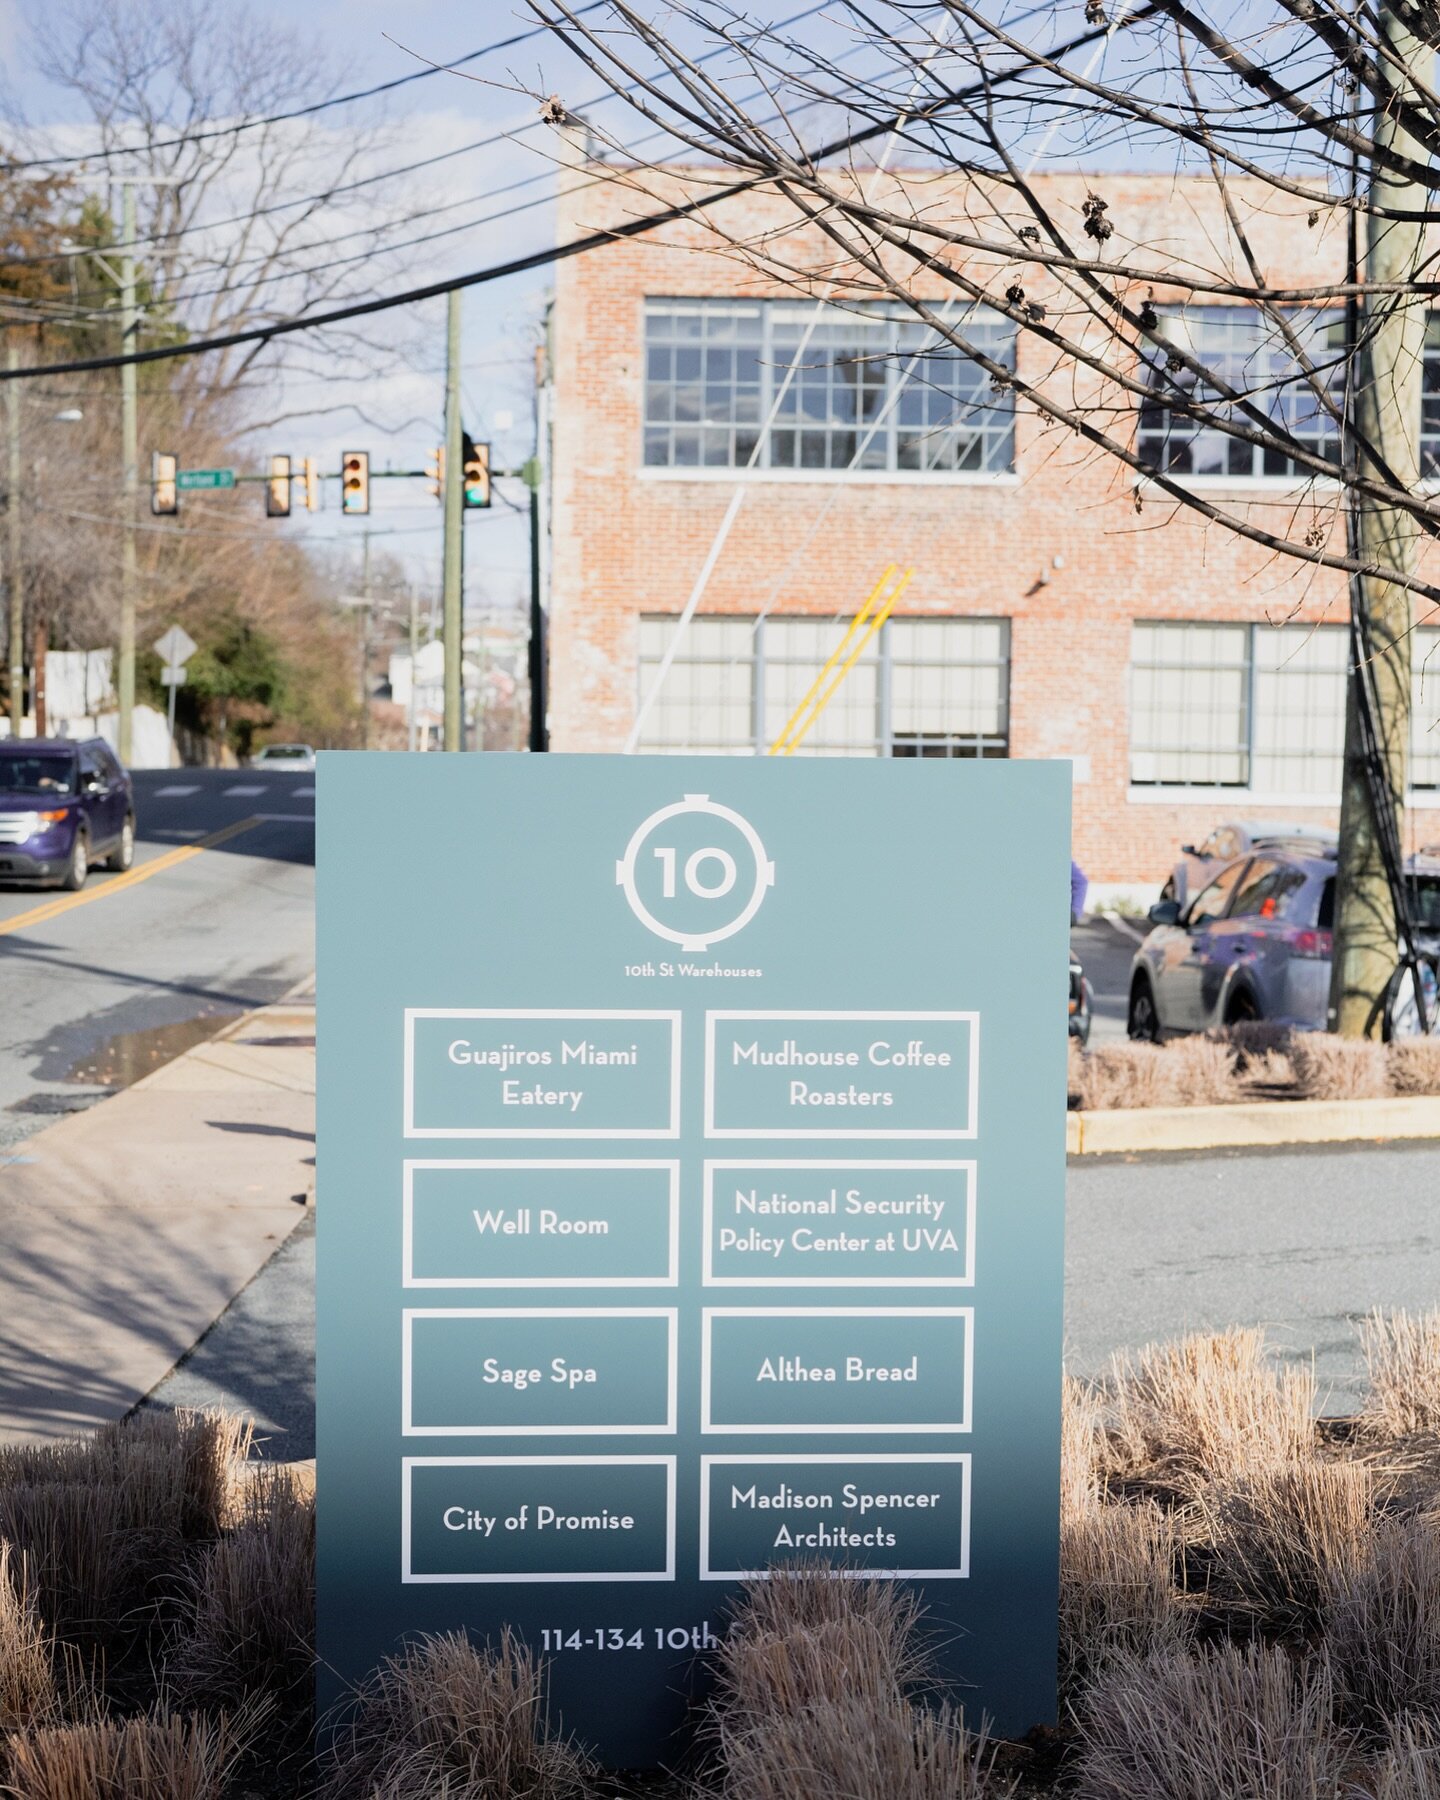 🚨New signage shinin in the sun, find your LOCAL faves here at @tenthstreetwarehouses &mdash; @mudhousecoffeeroasters @altheabread @wellroomcville @guajiros_cville @city_of_promise &amp; others 🚨

Walk on down from @uva on one of these sunny days to